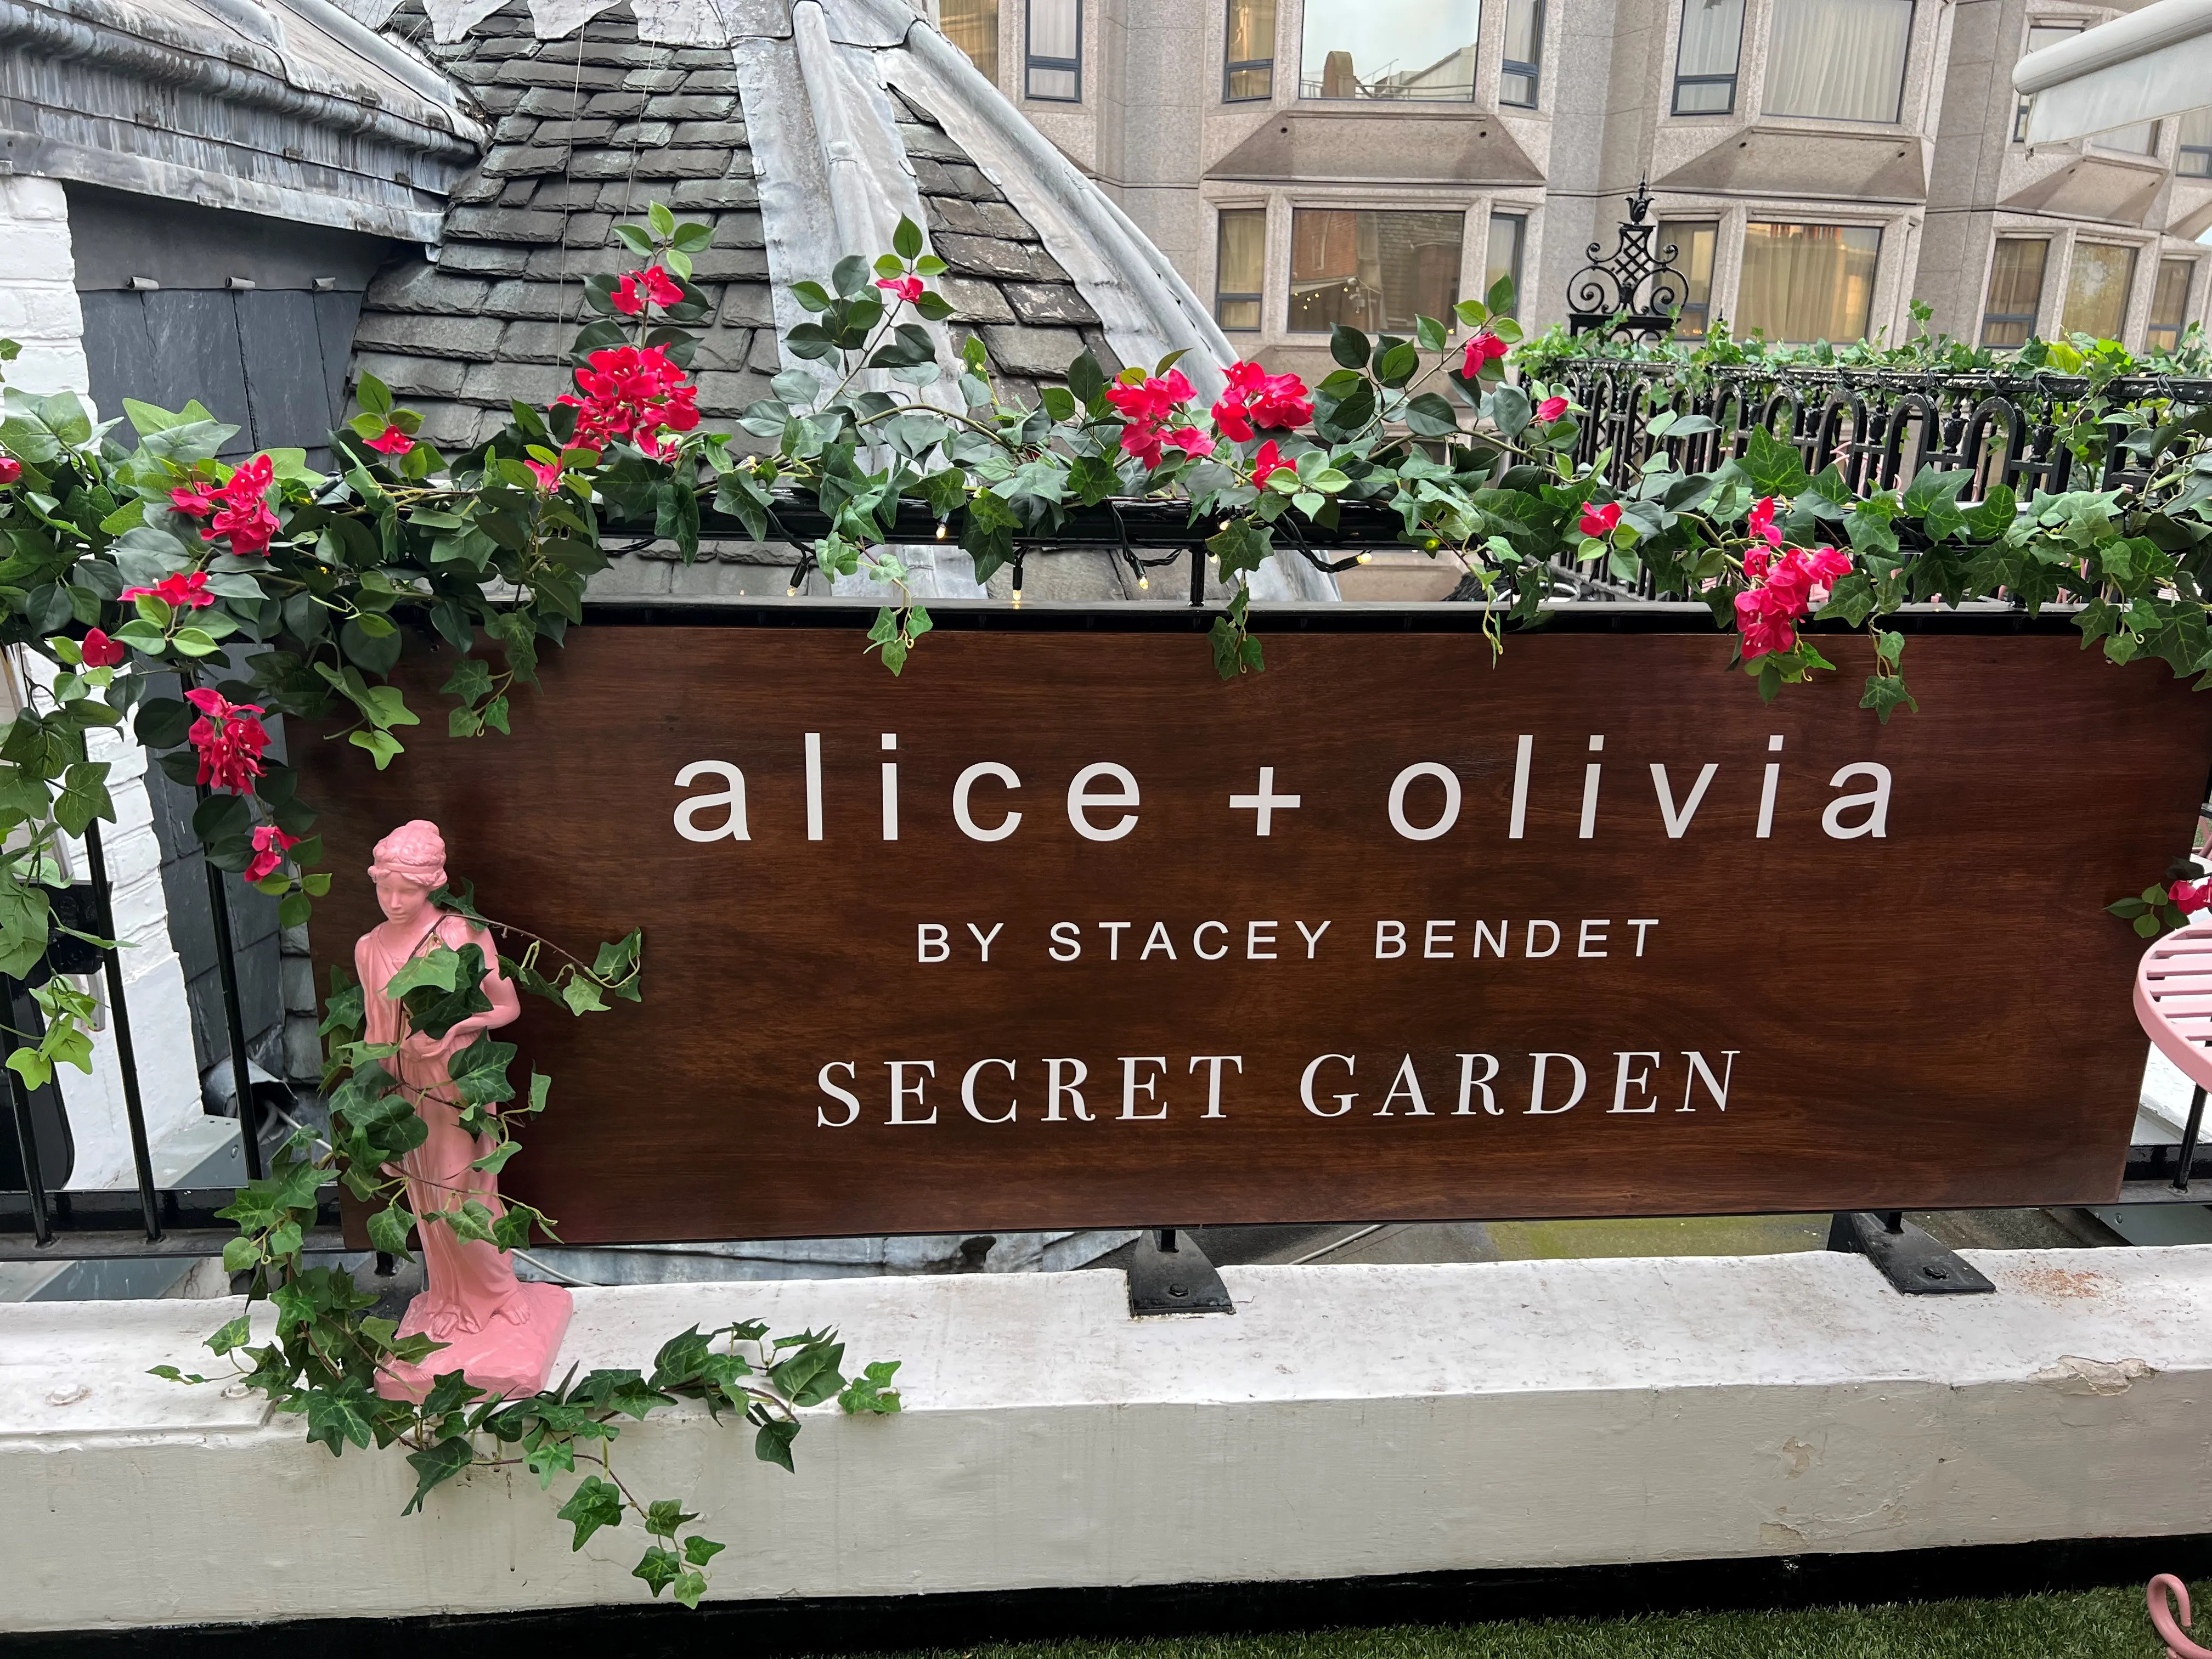 Alice and olivia terrace take over